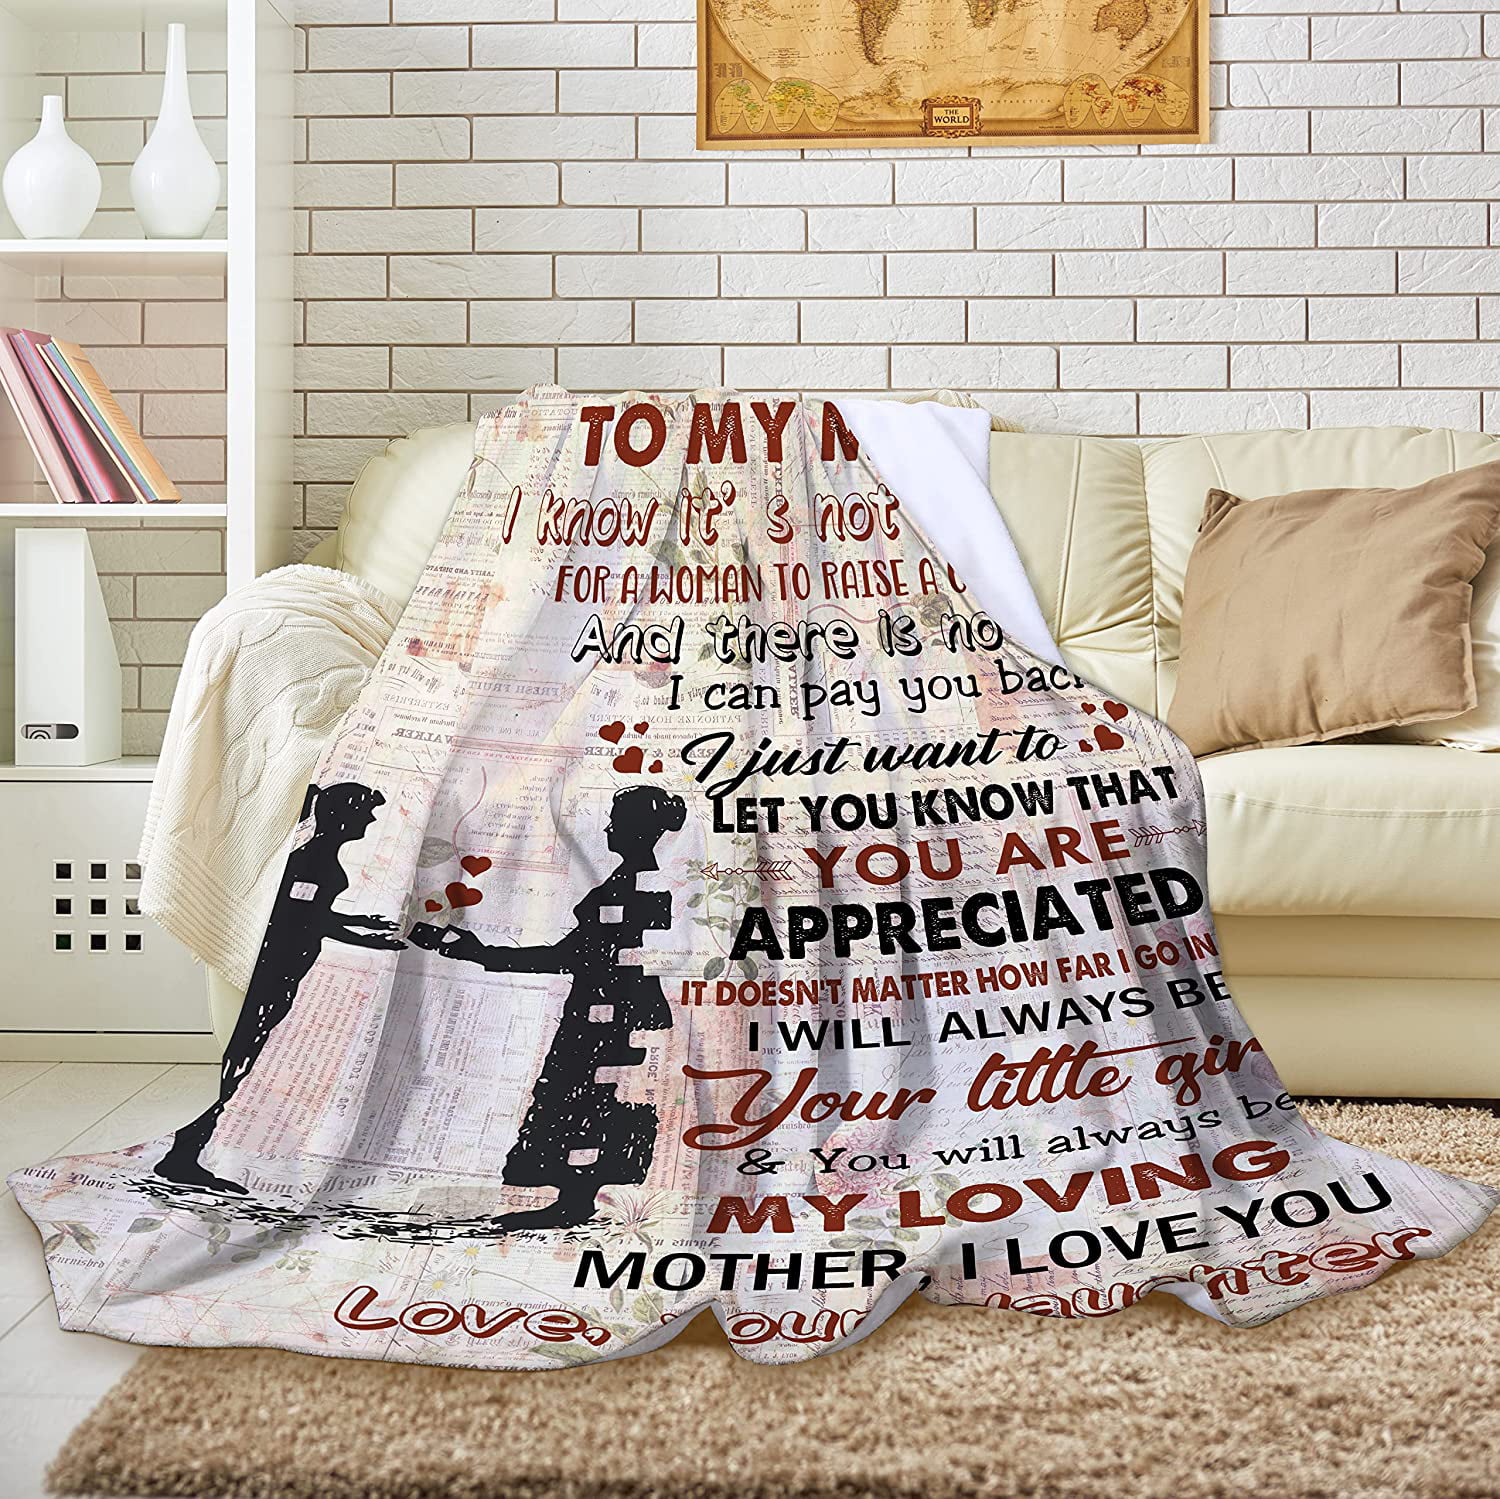 Personalized throw blanket gift for Mom or Dad, thanking them for being who  they are, what Mom has meant to you since birth.